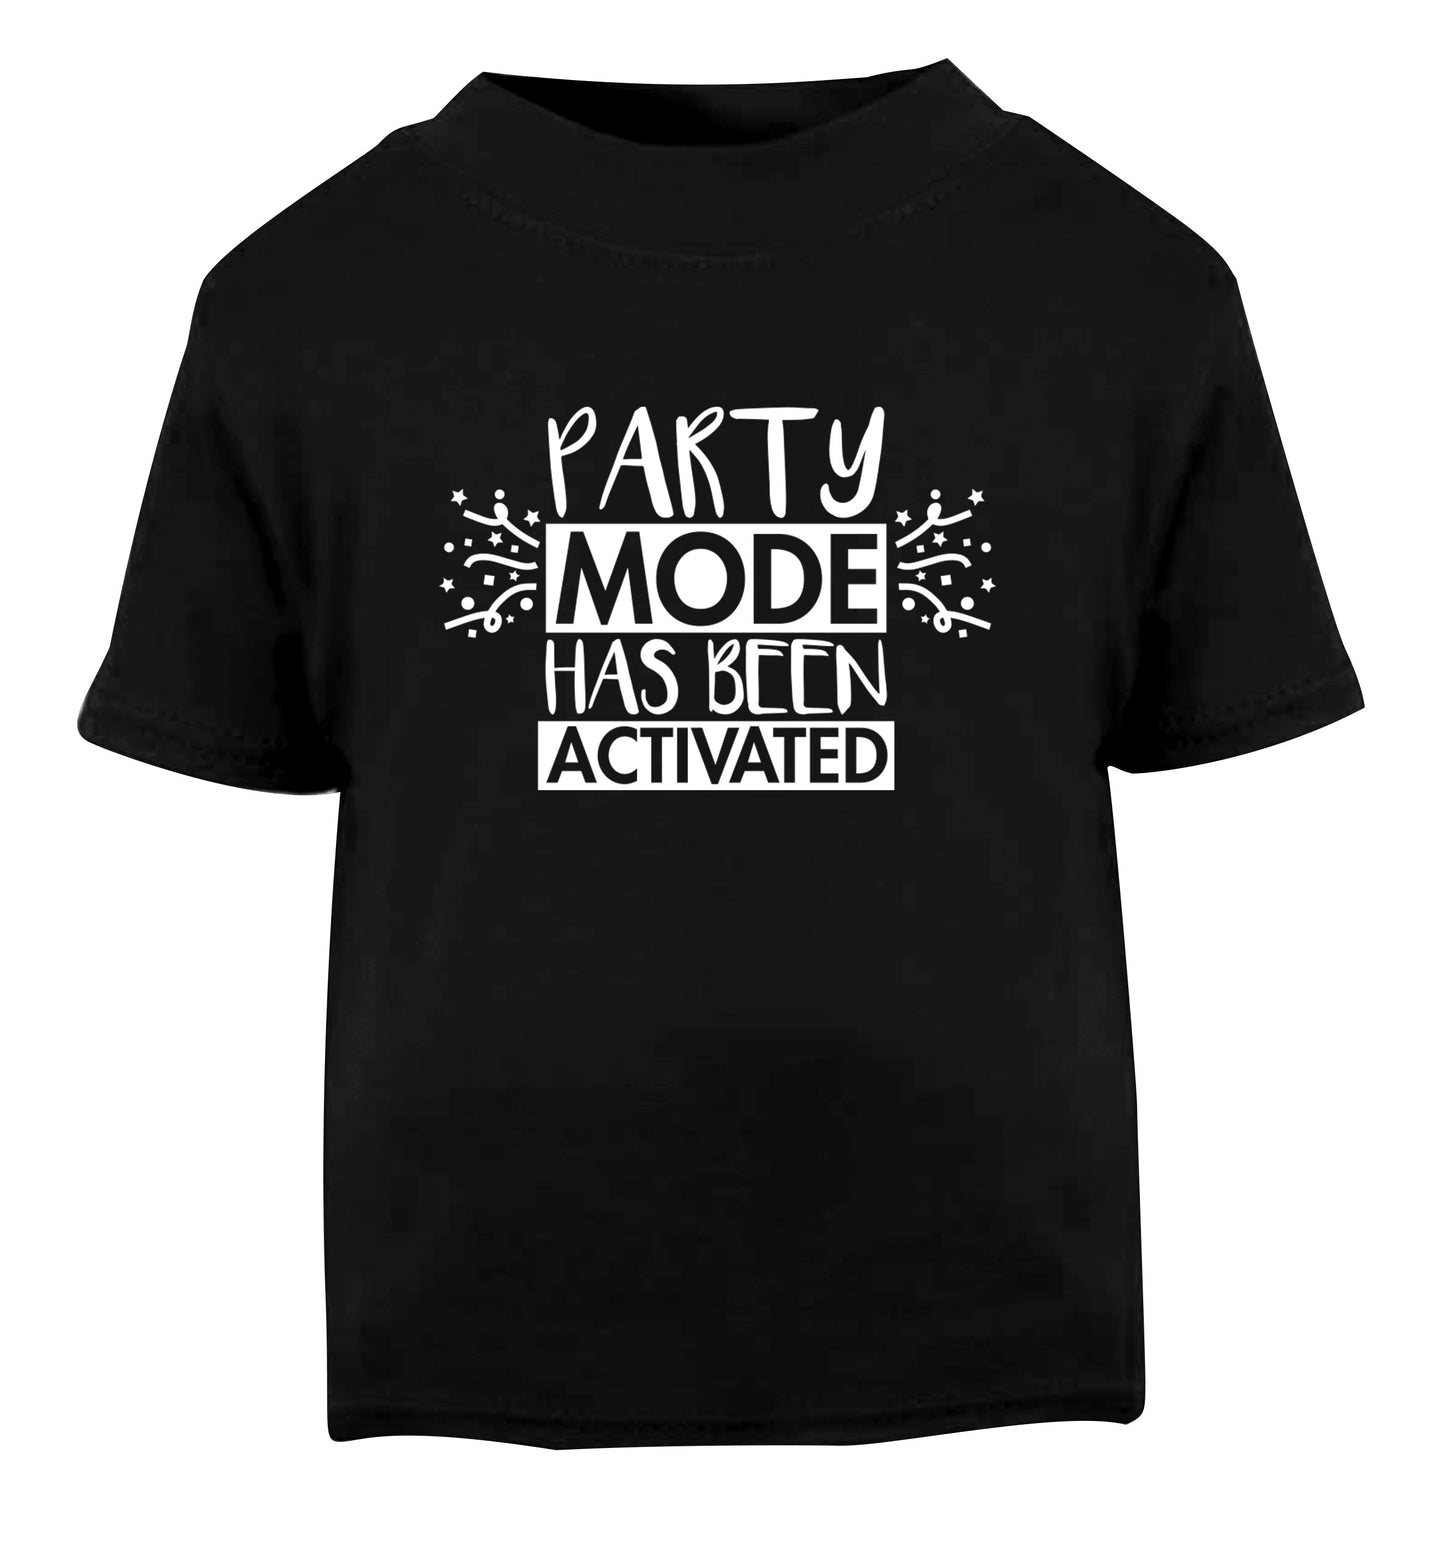 Please do not disturb party mode has been activated Black Baby Toddler Tshirt 2 years